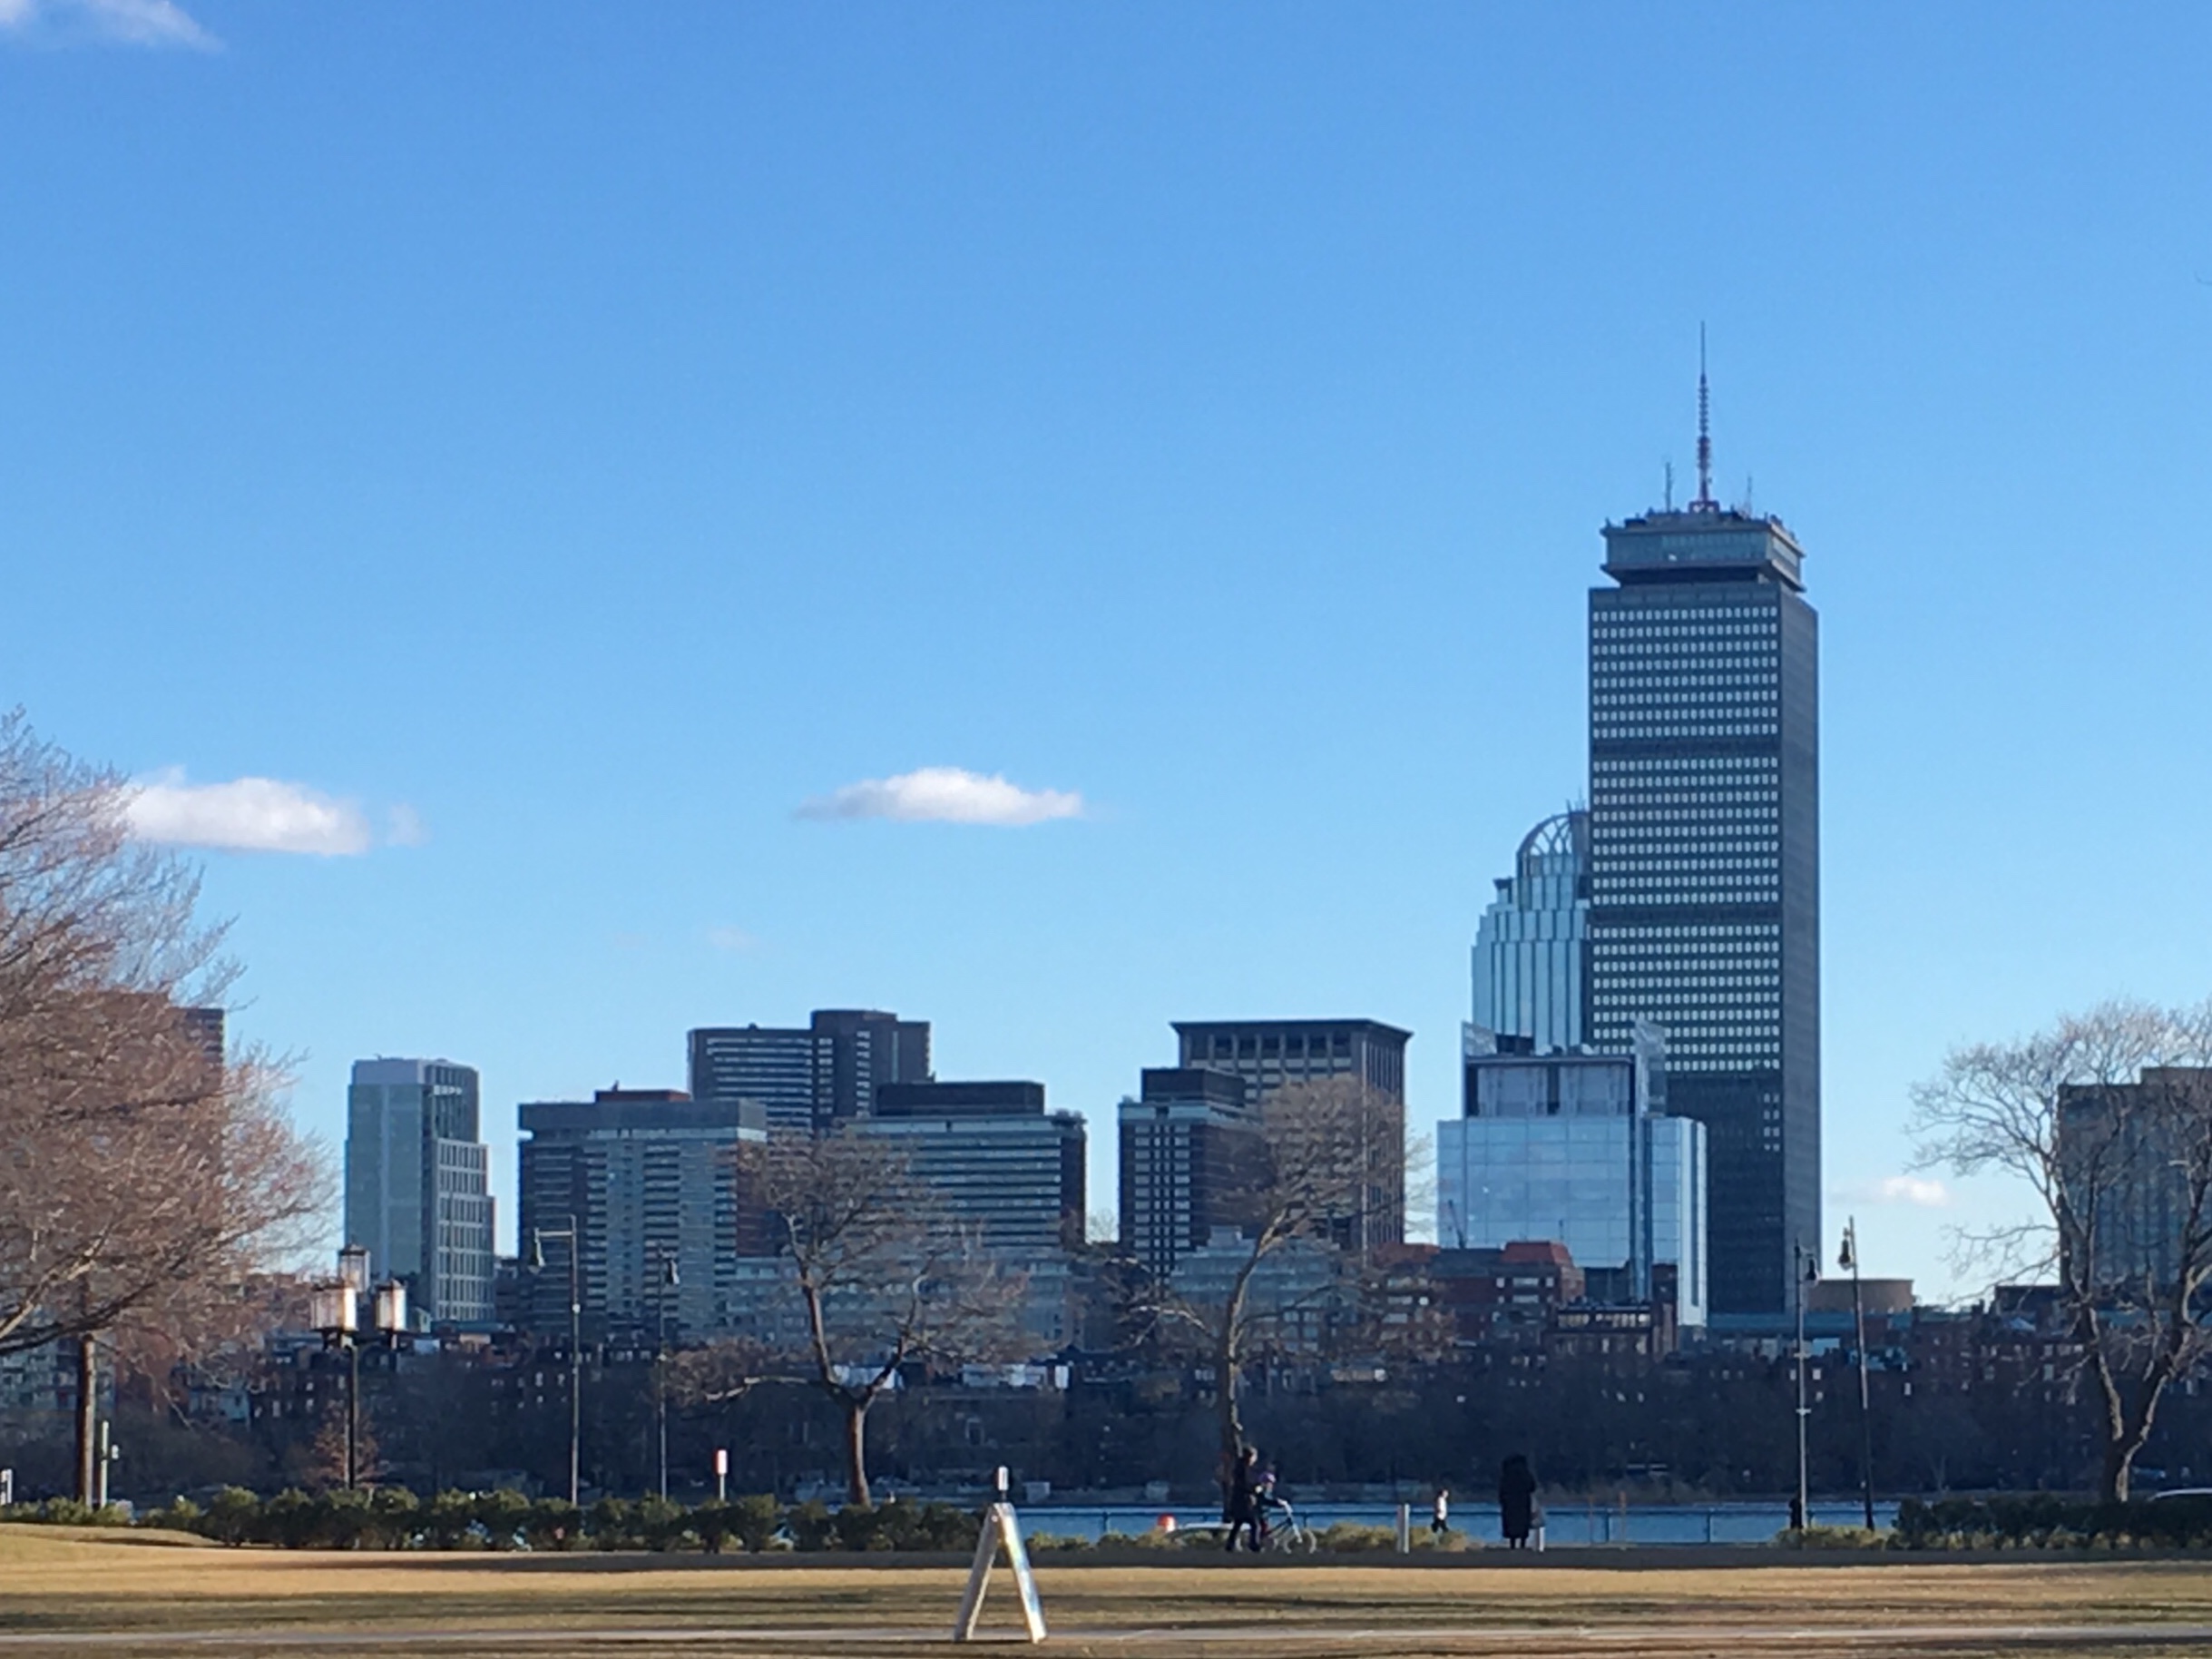 A view of the Boston skyline from Cambridge.